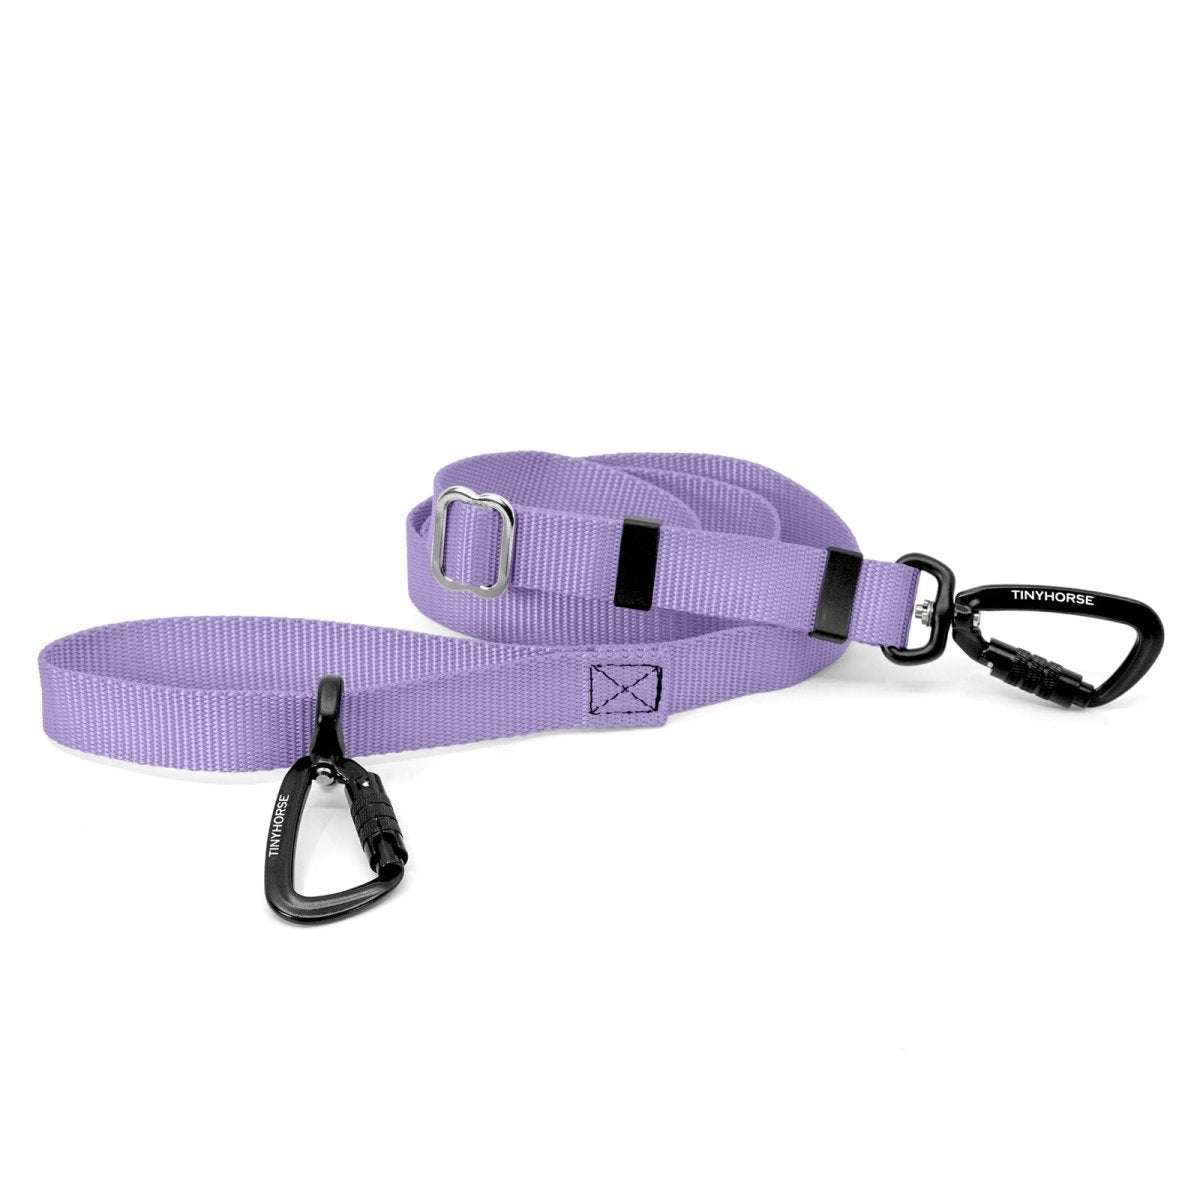 A lavender-coloured Lead-All Lite Extra with an adjustable nylon webbing leash and 2 auto-locking carabiners